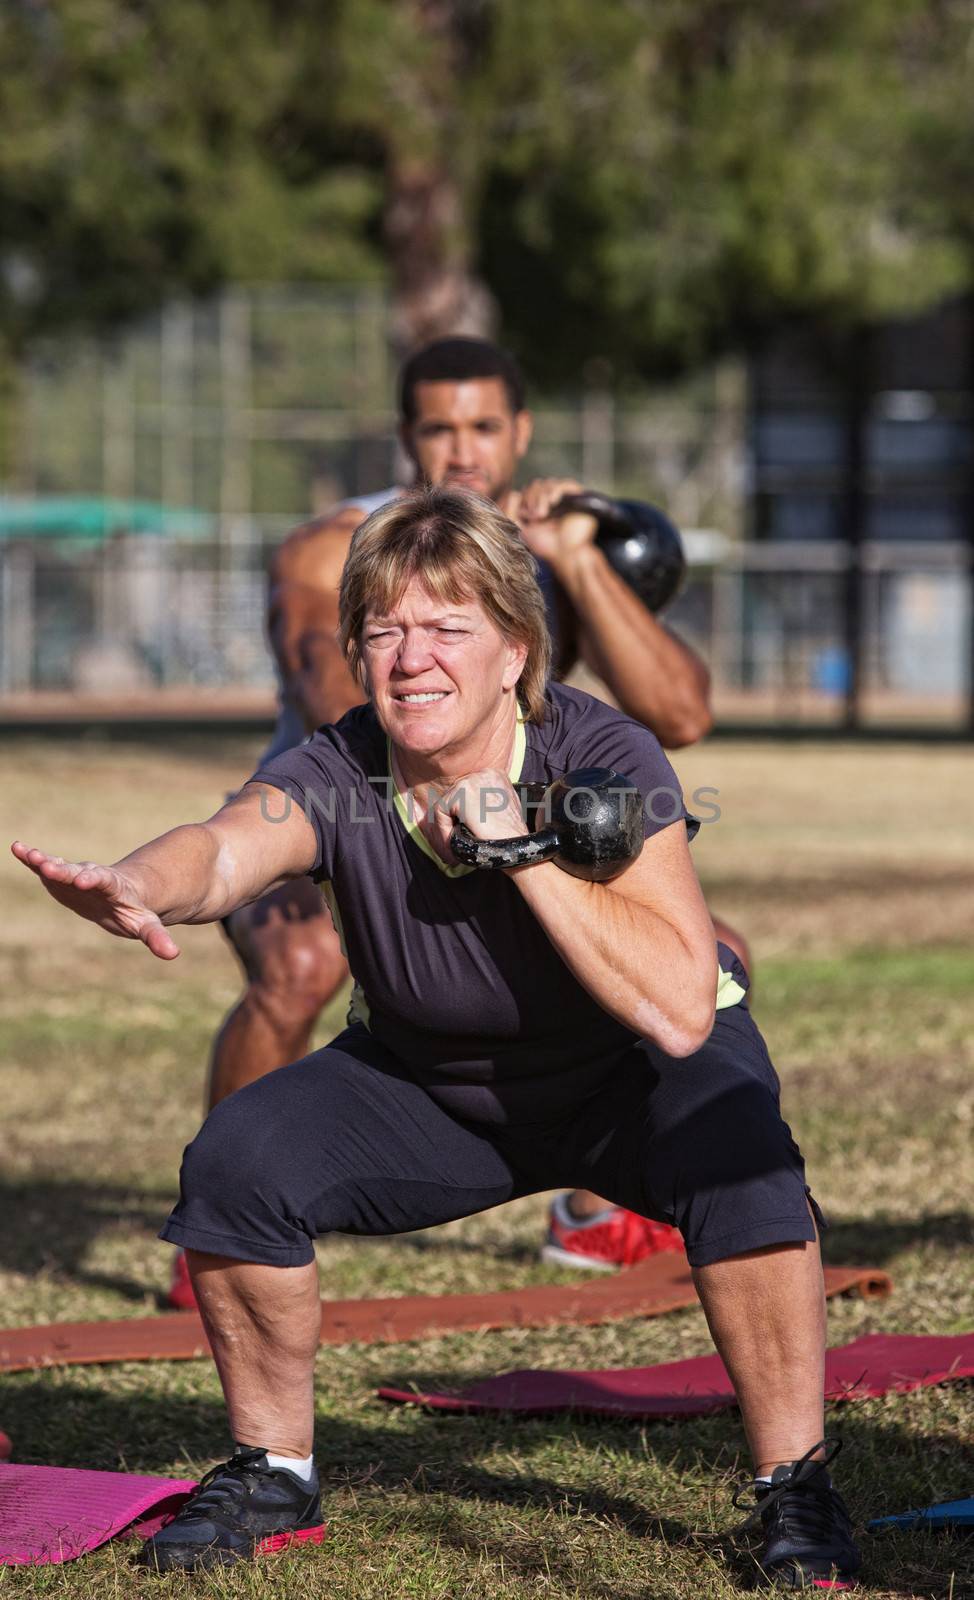 Strong middle aged woman squatting with kettle bell weights